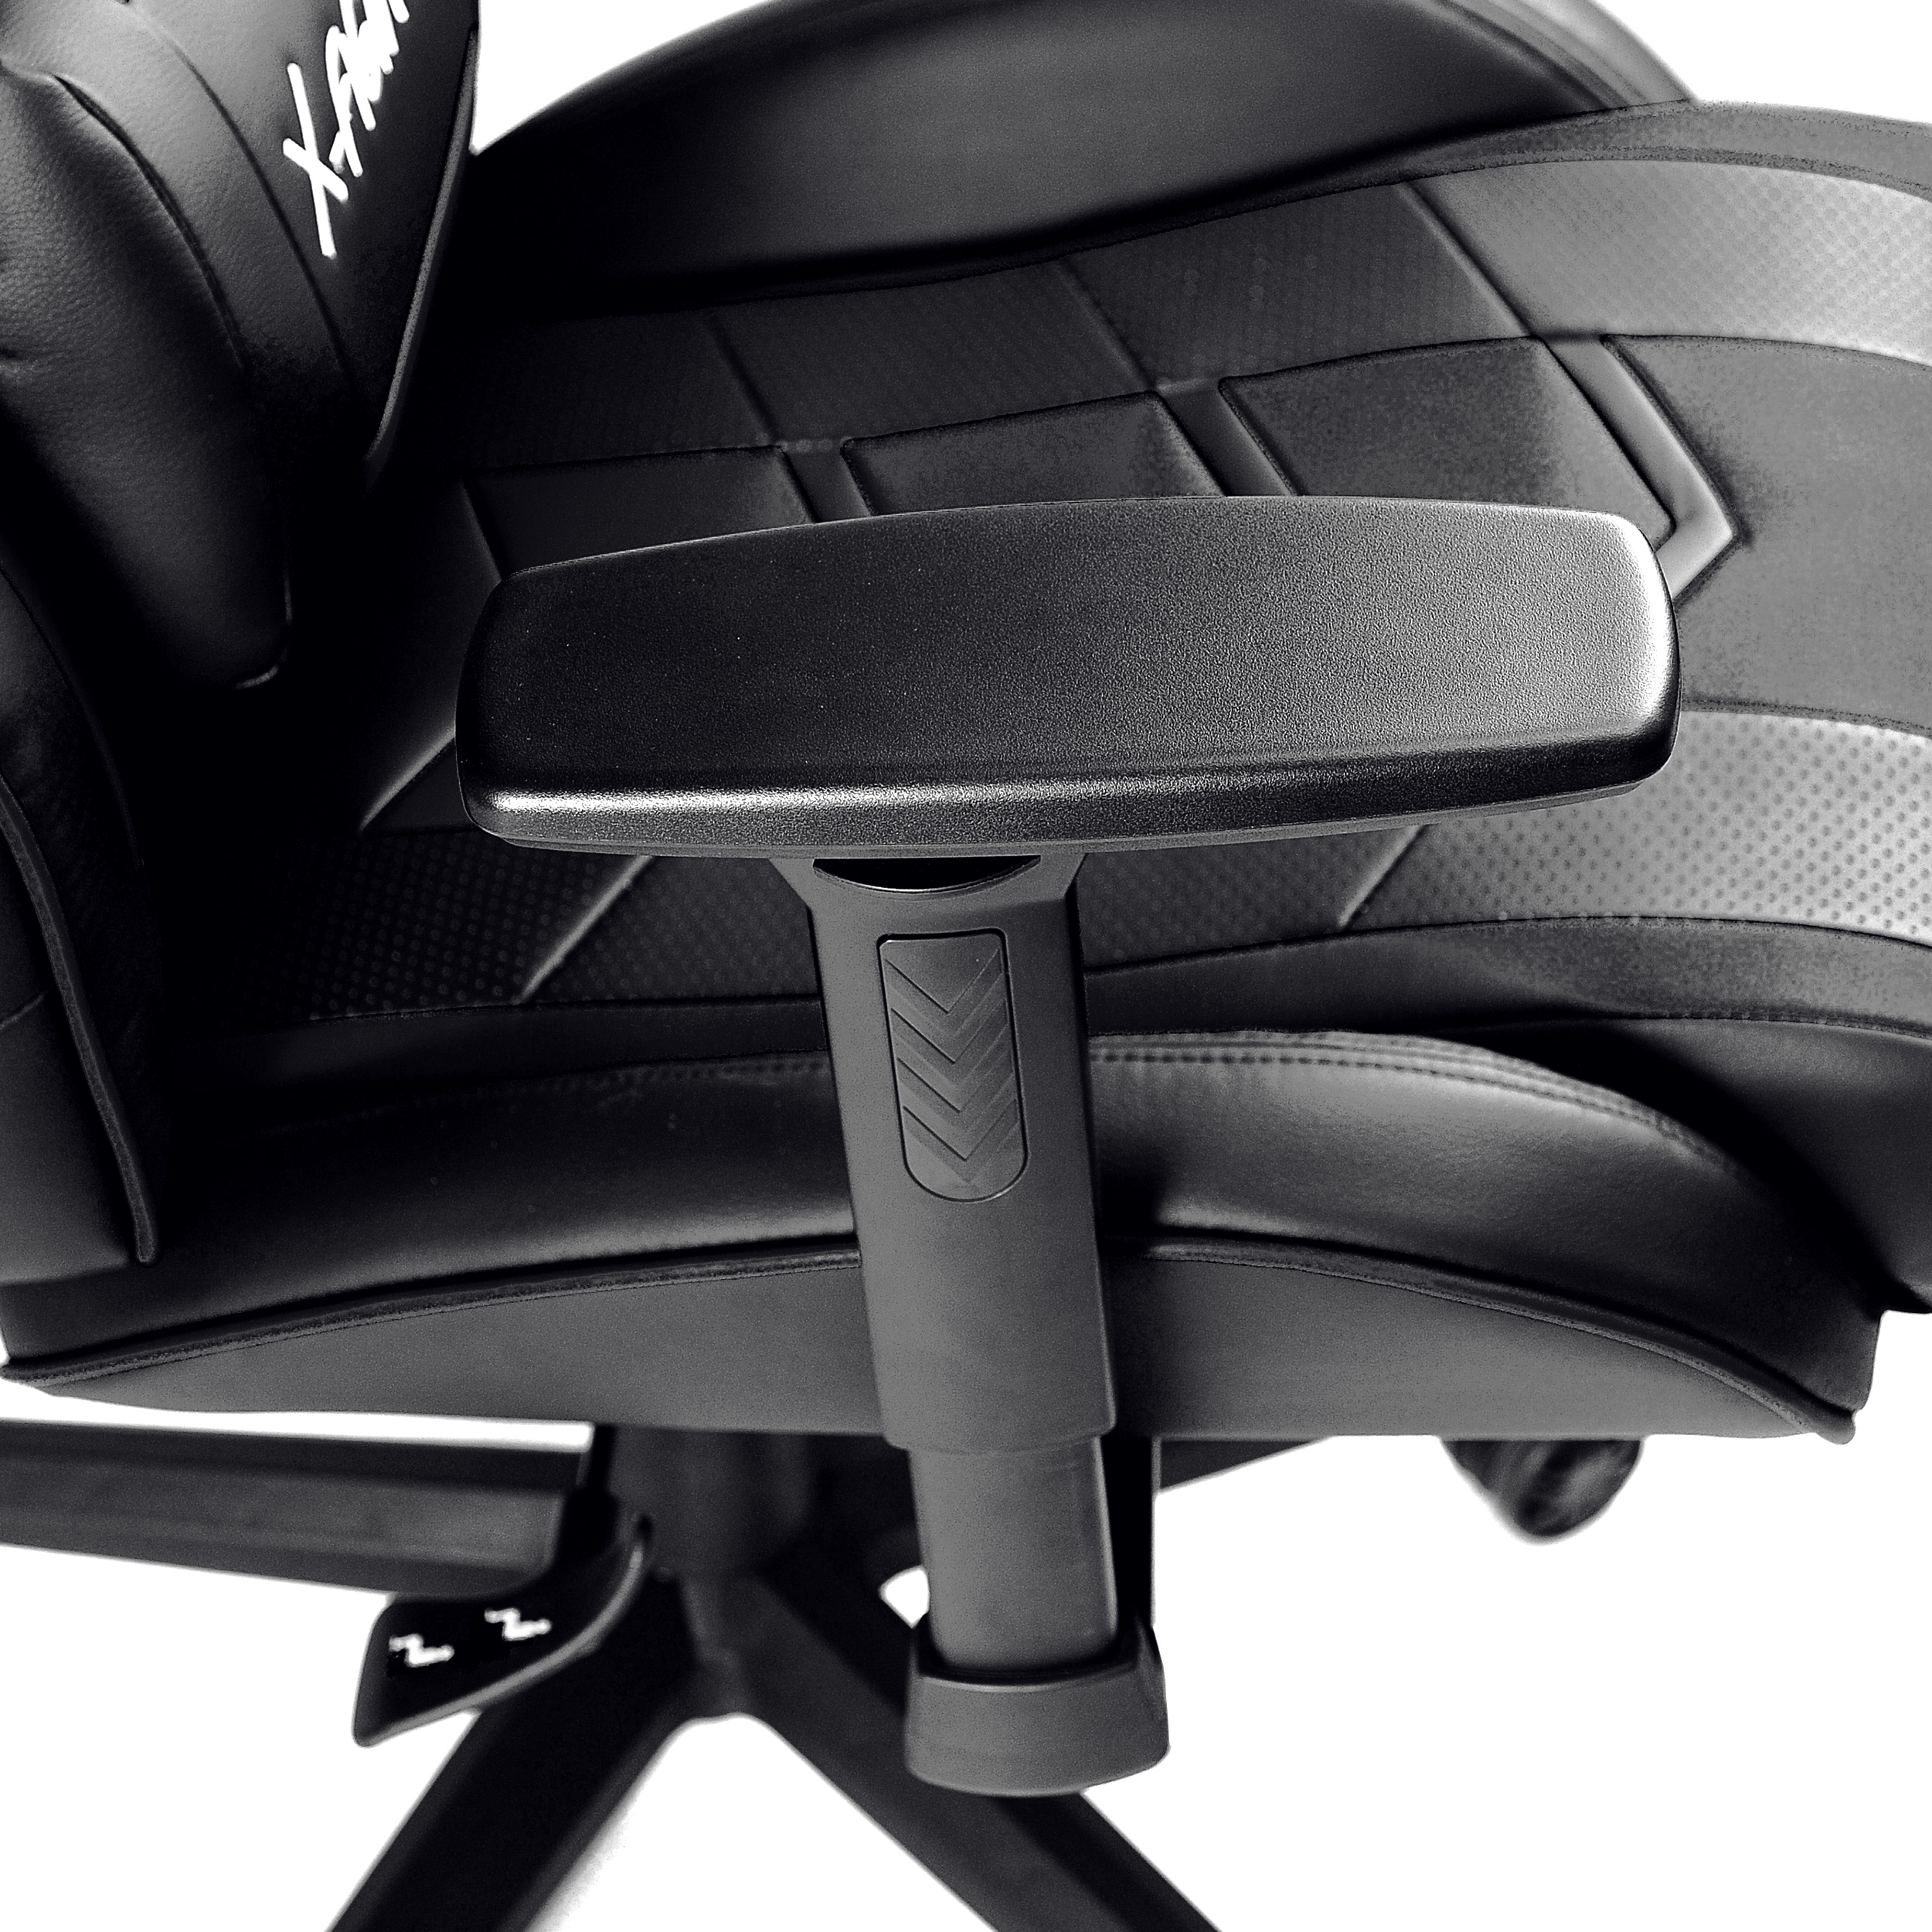 CHAIRS STUHL DIABLO Gaming black X-FIGHTER GAMING Chair, NORMAL